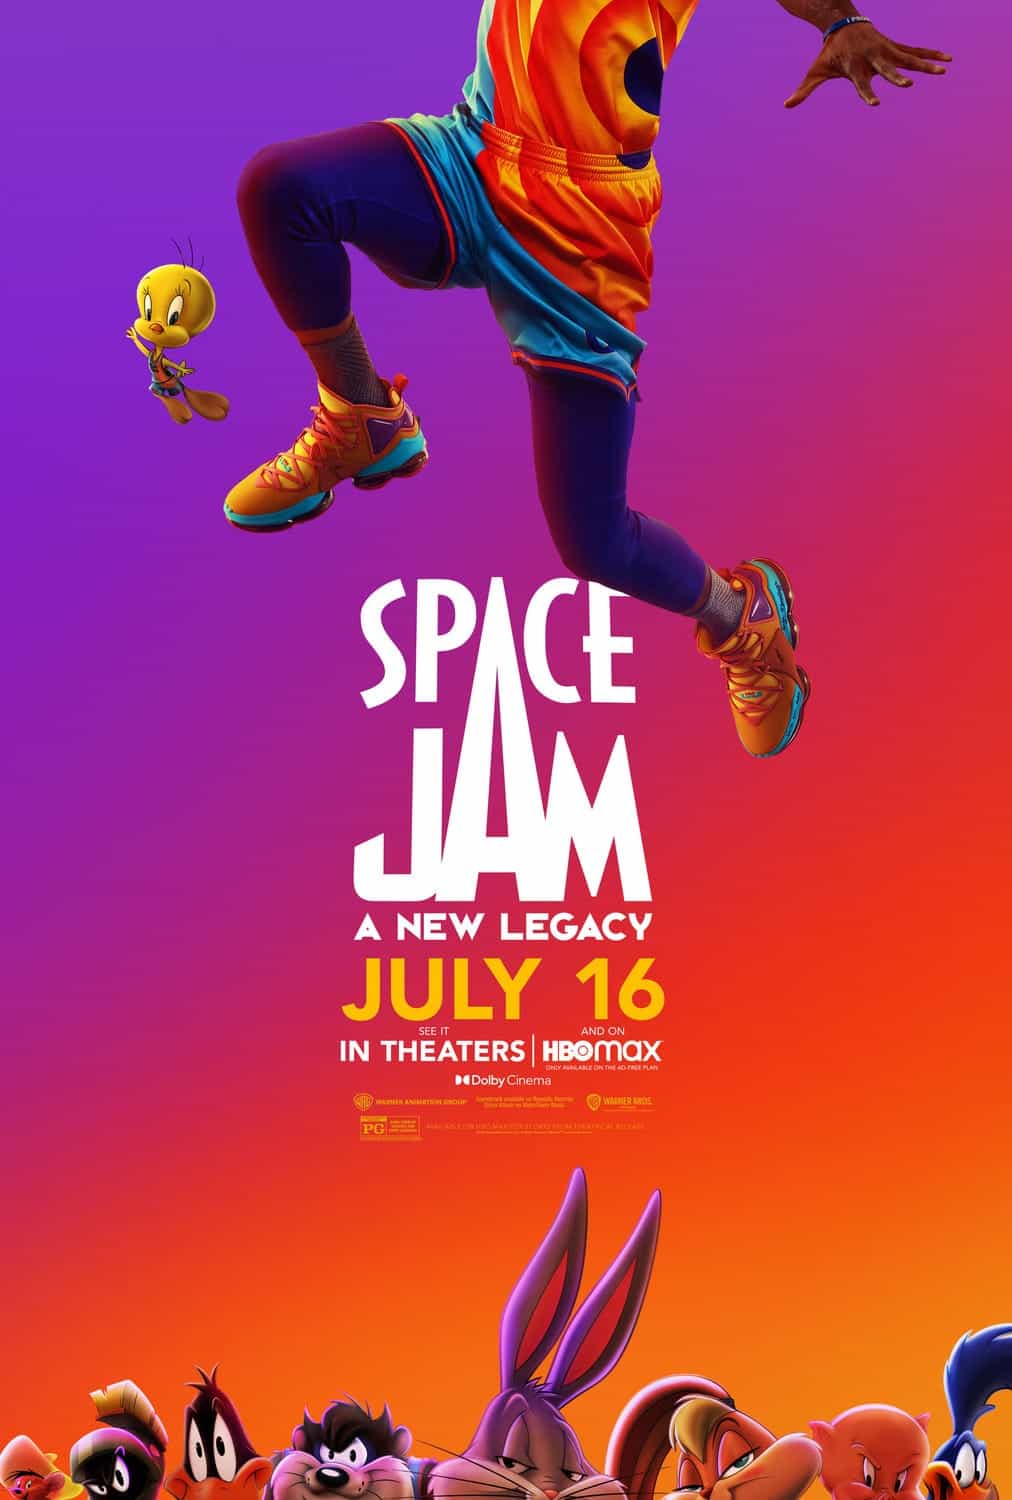 LeBron James and Bugs Bunny star in the first trailer for Space jam: A New Legacy